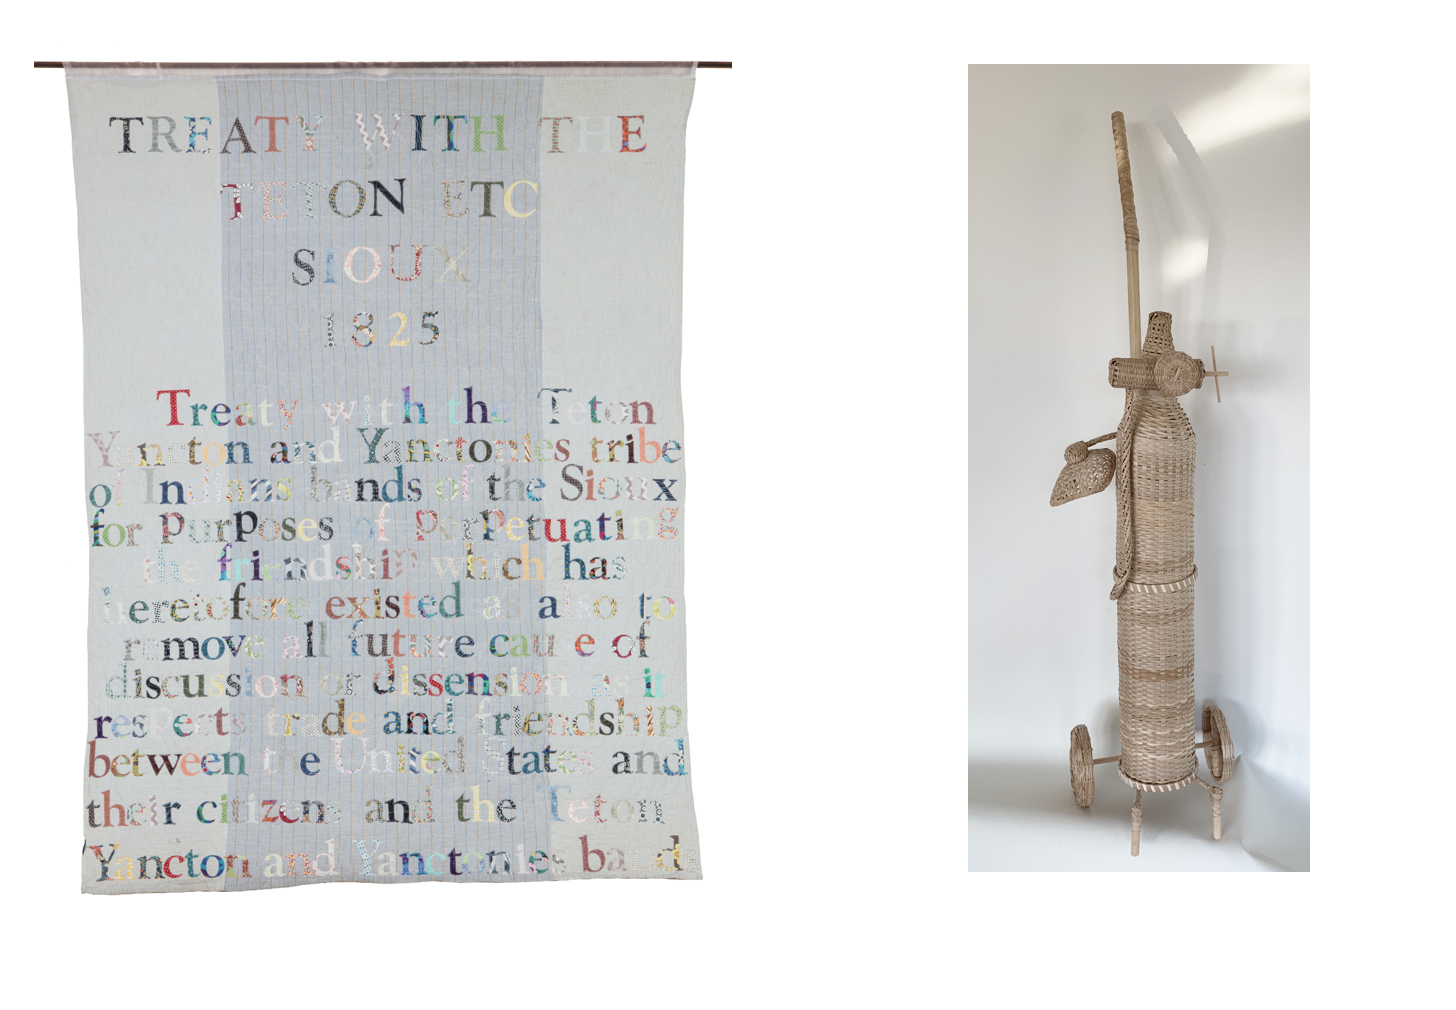 This is an image of two works of art by Gina Adams and Merritt Johnson - one is a textile and the other a sculpture